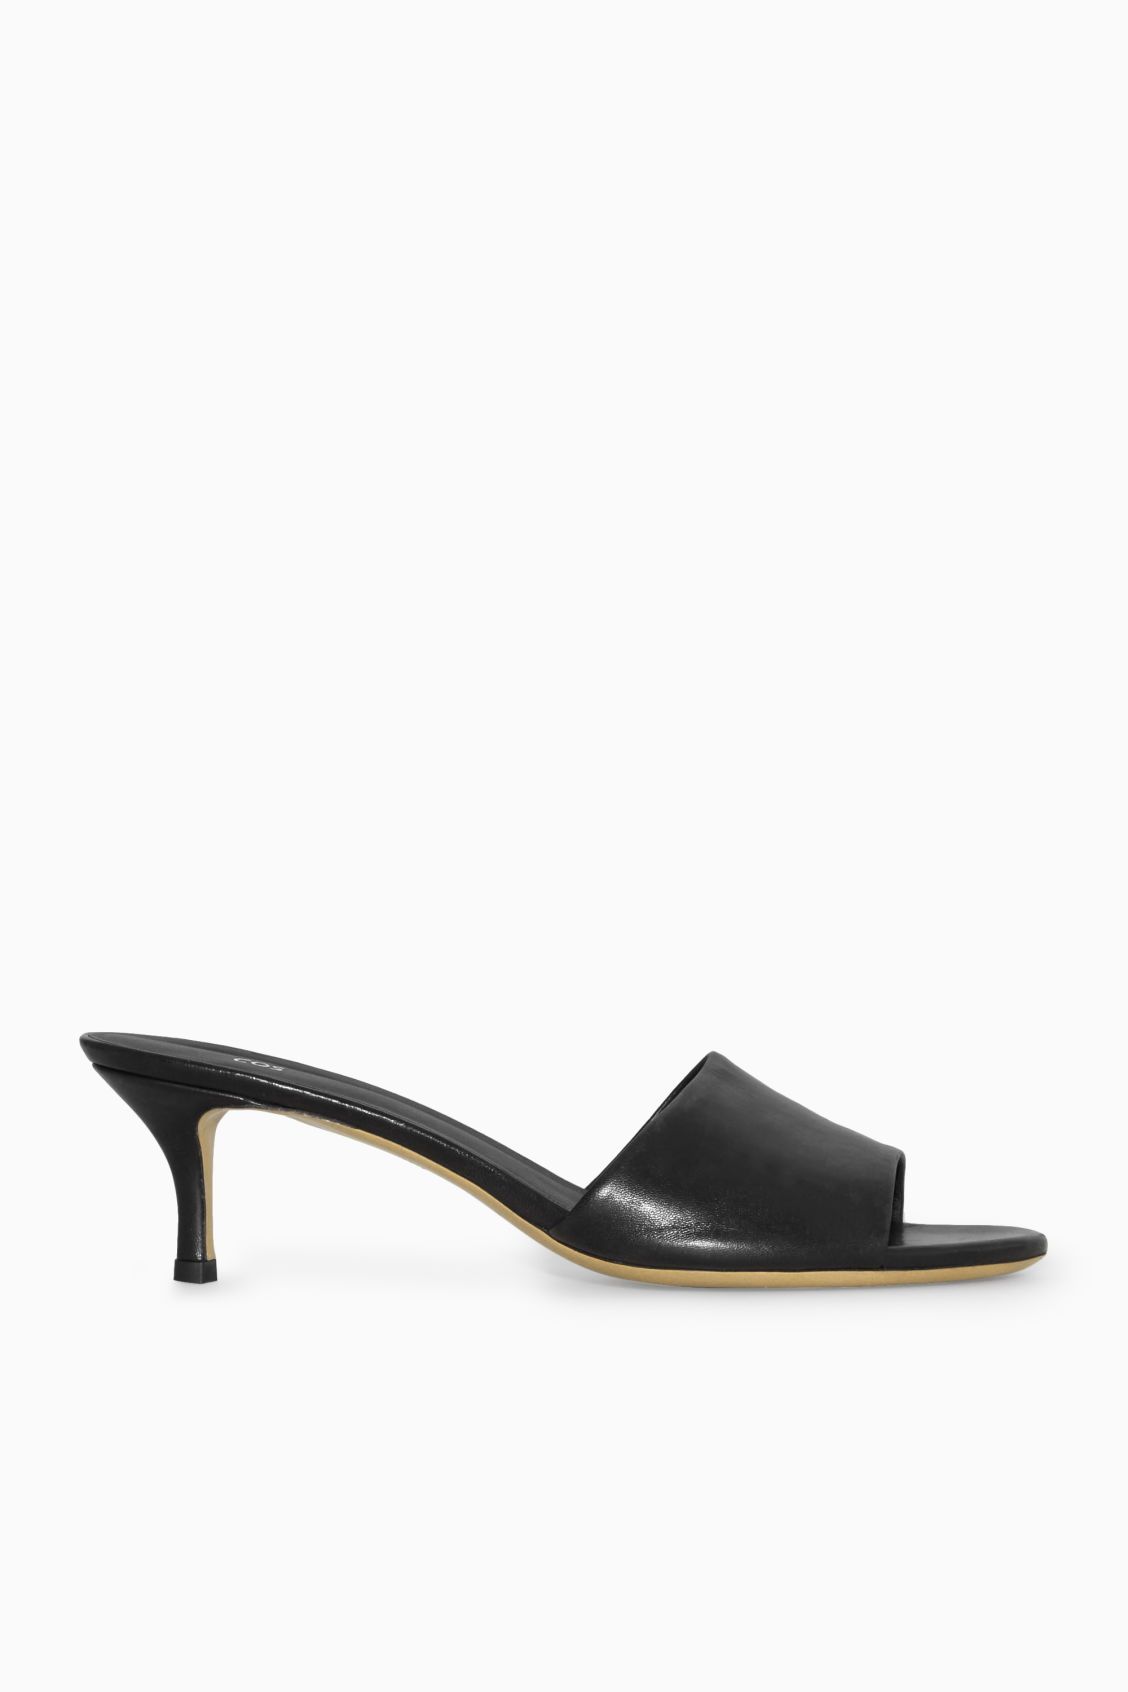 LEATHER MULES - BLACK - Shoes - COS | COS (US)